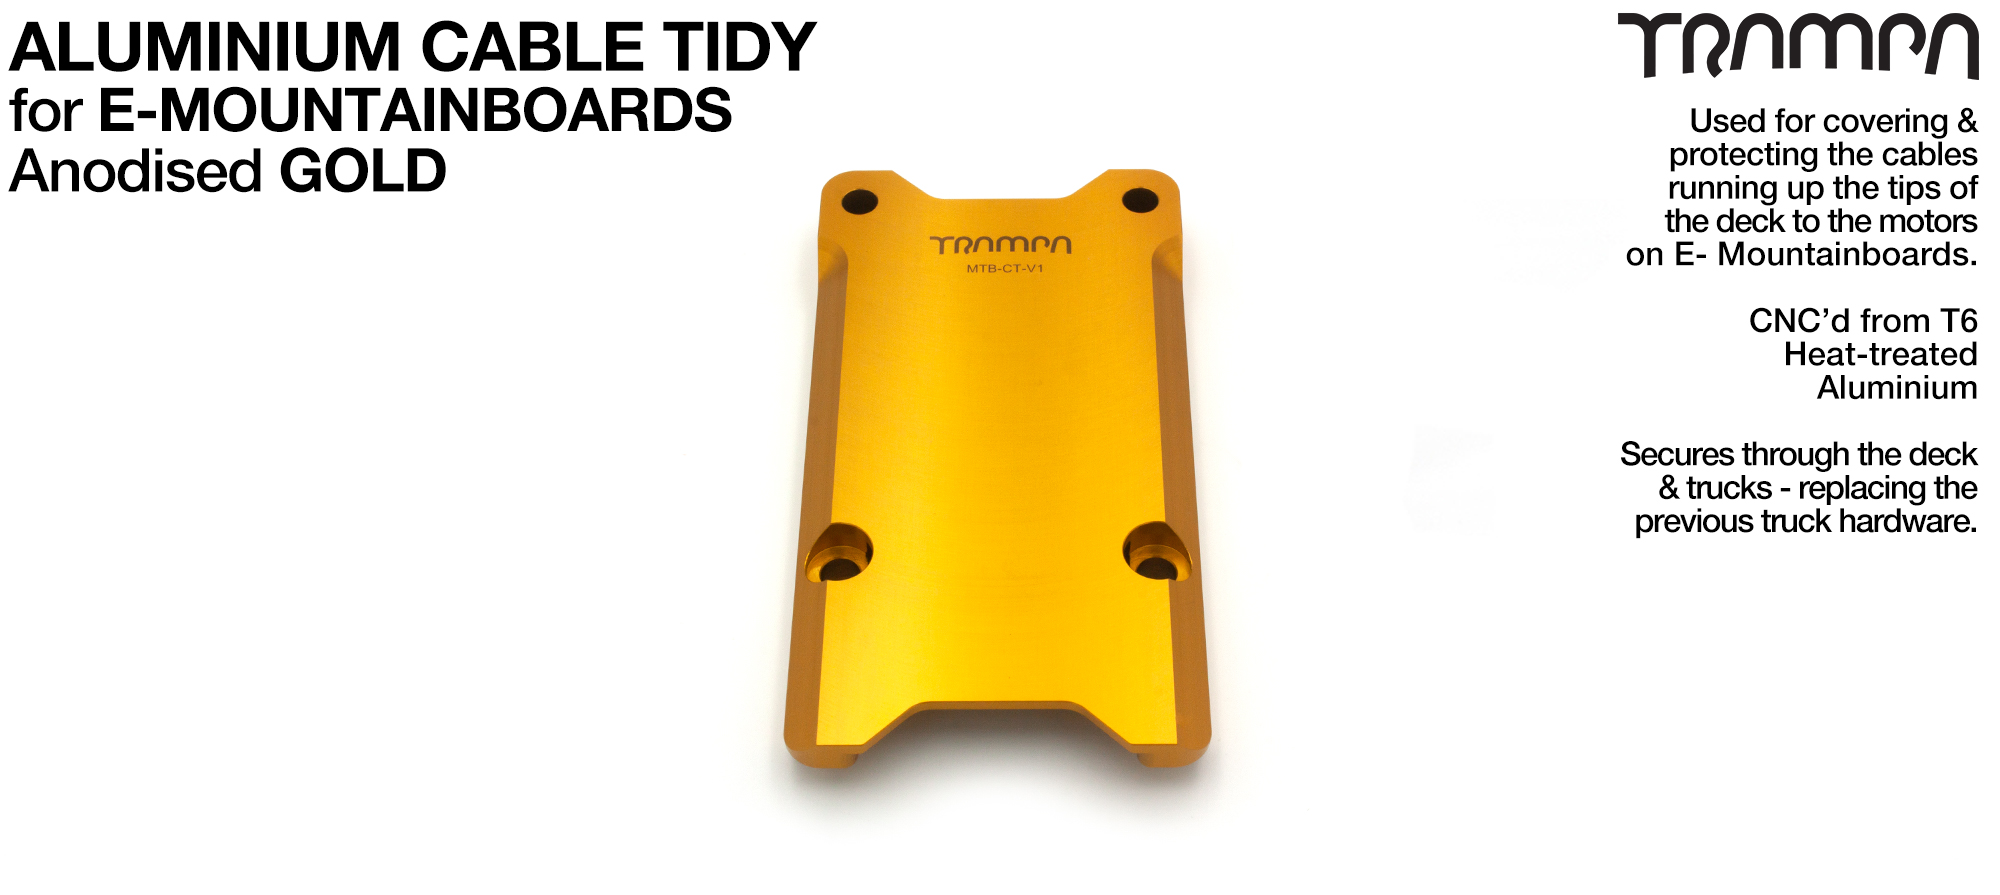 Anodised Aluminum Cable Tidy - GOLD V1